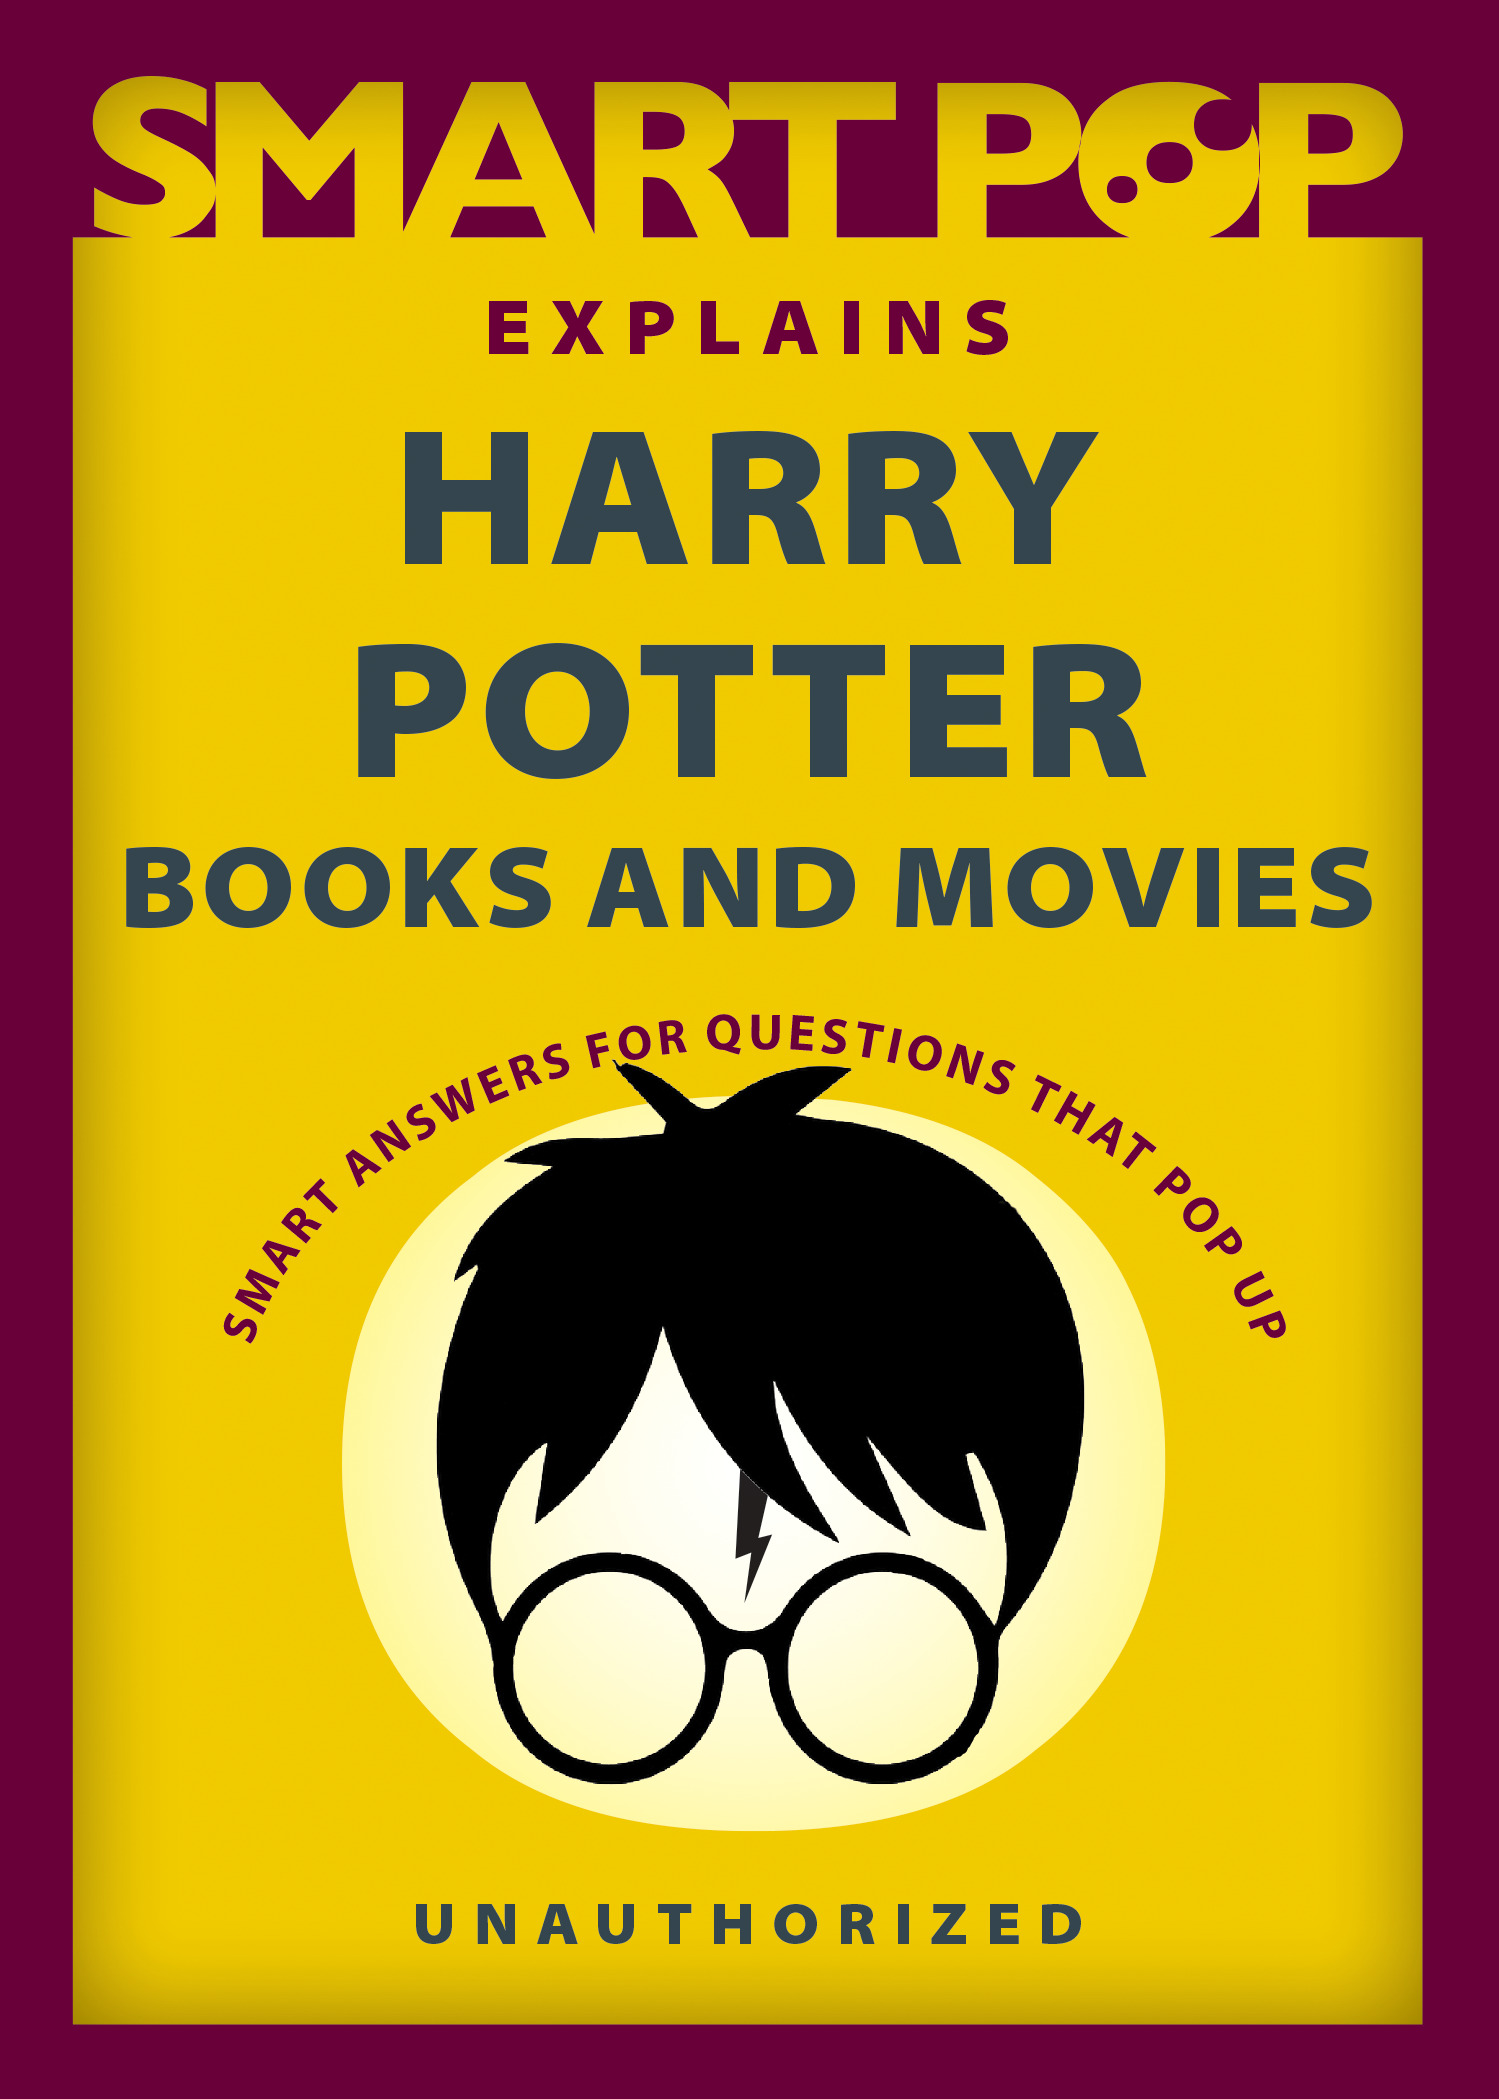 Smart Pop Explains Harry Potter Books and Movies | The Editors of Smart Pop